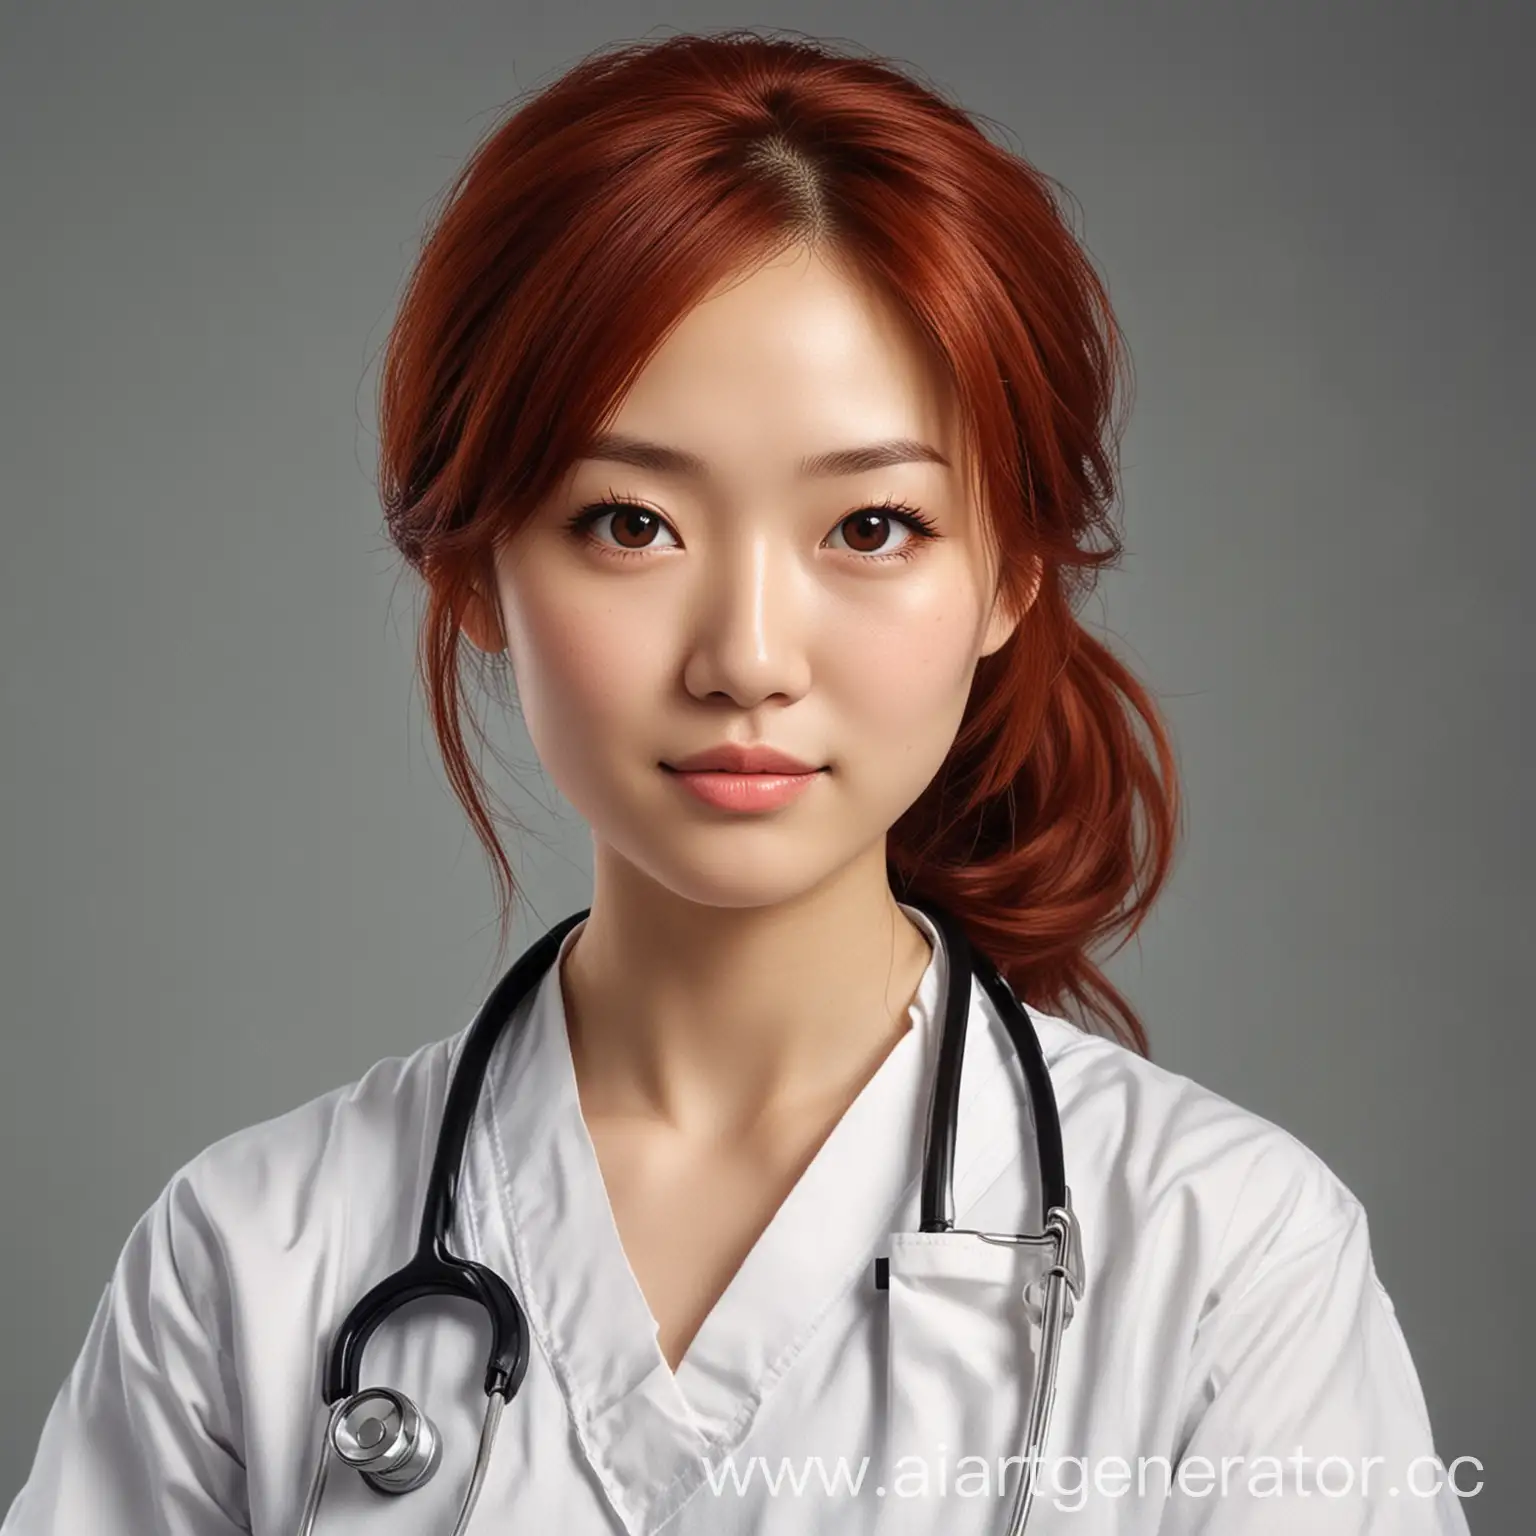 East-Asian-Medical-Professional-Redhead-Girl-Age-3034